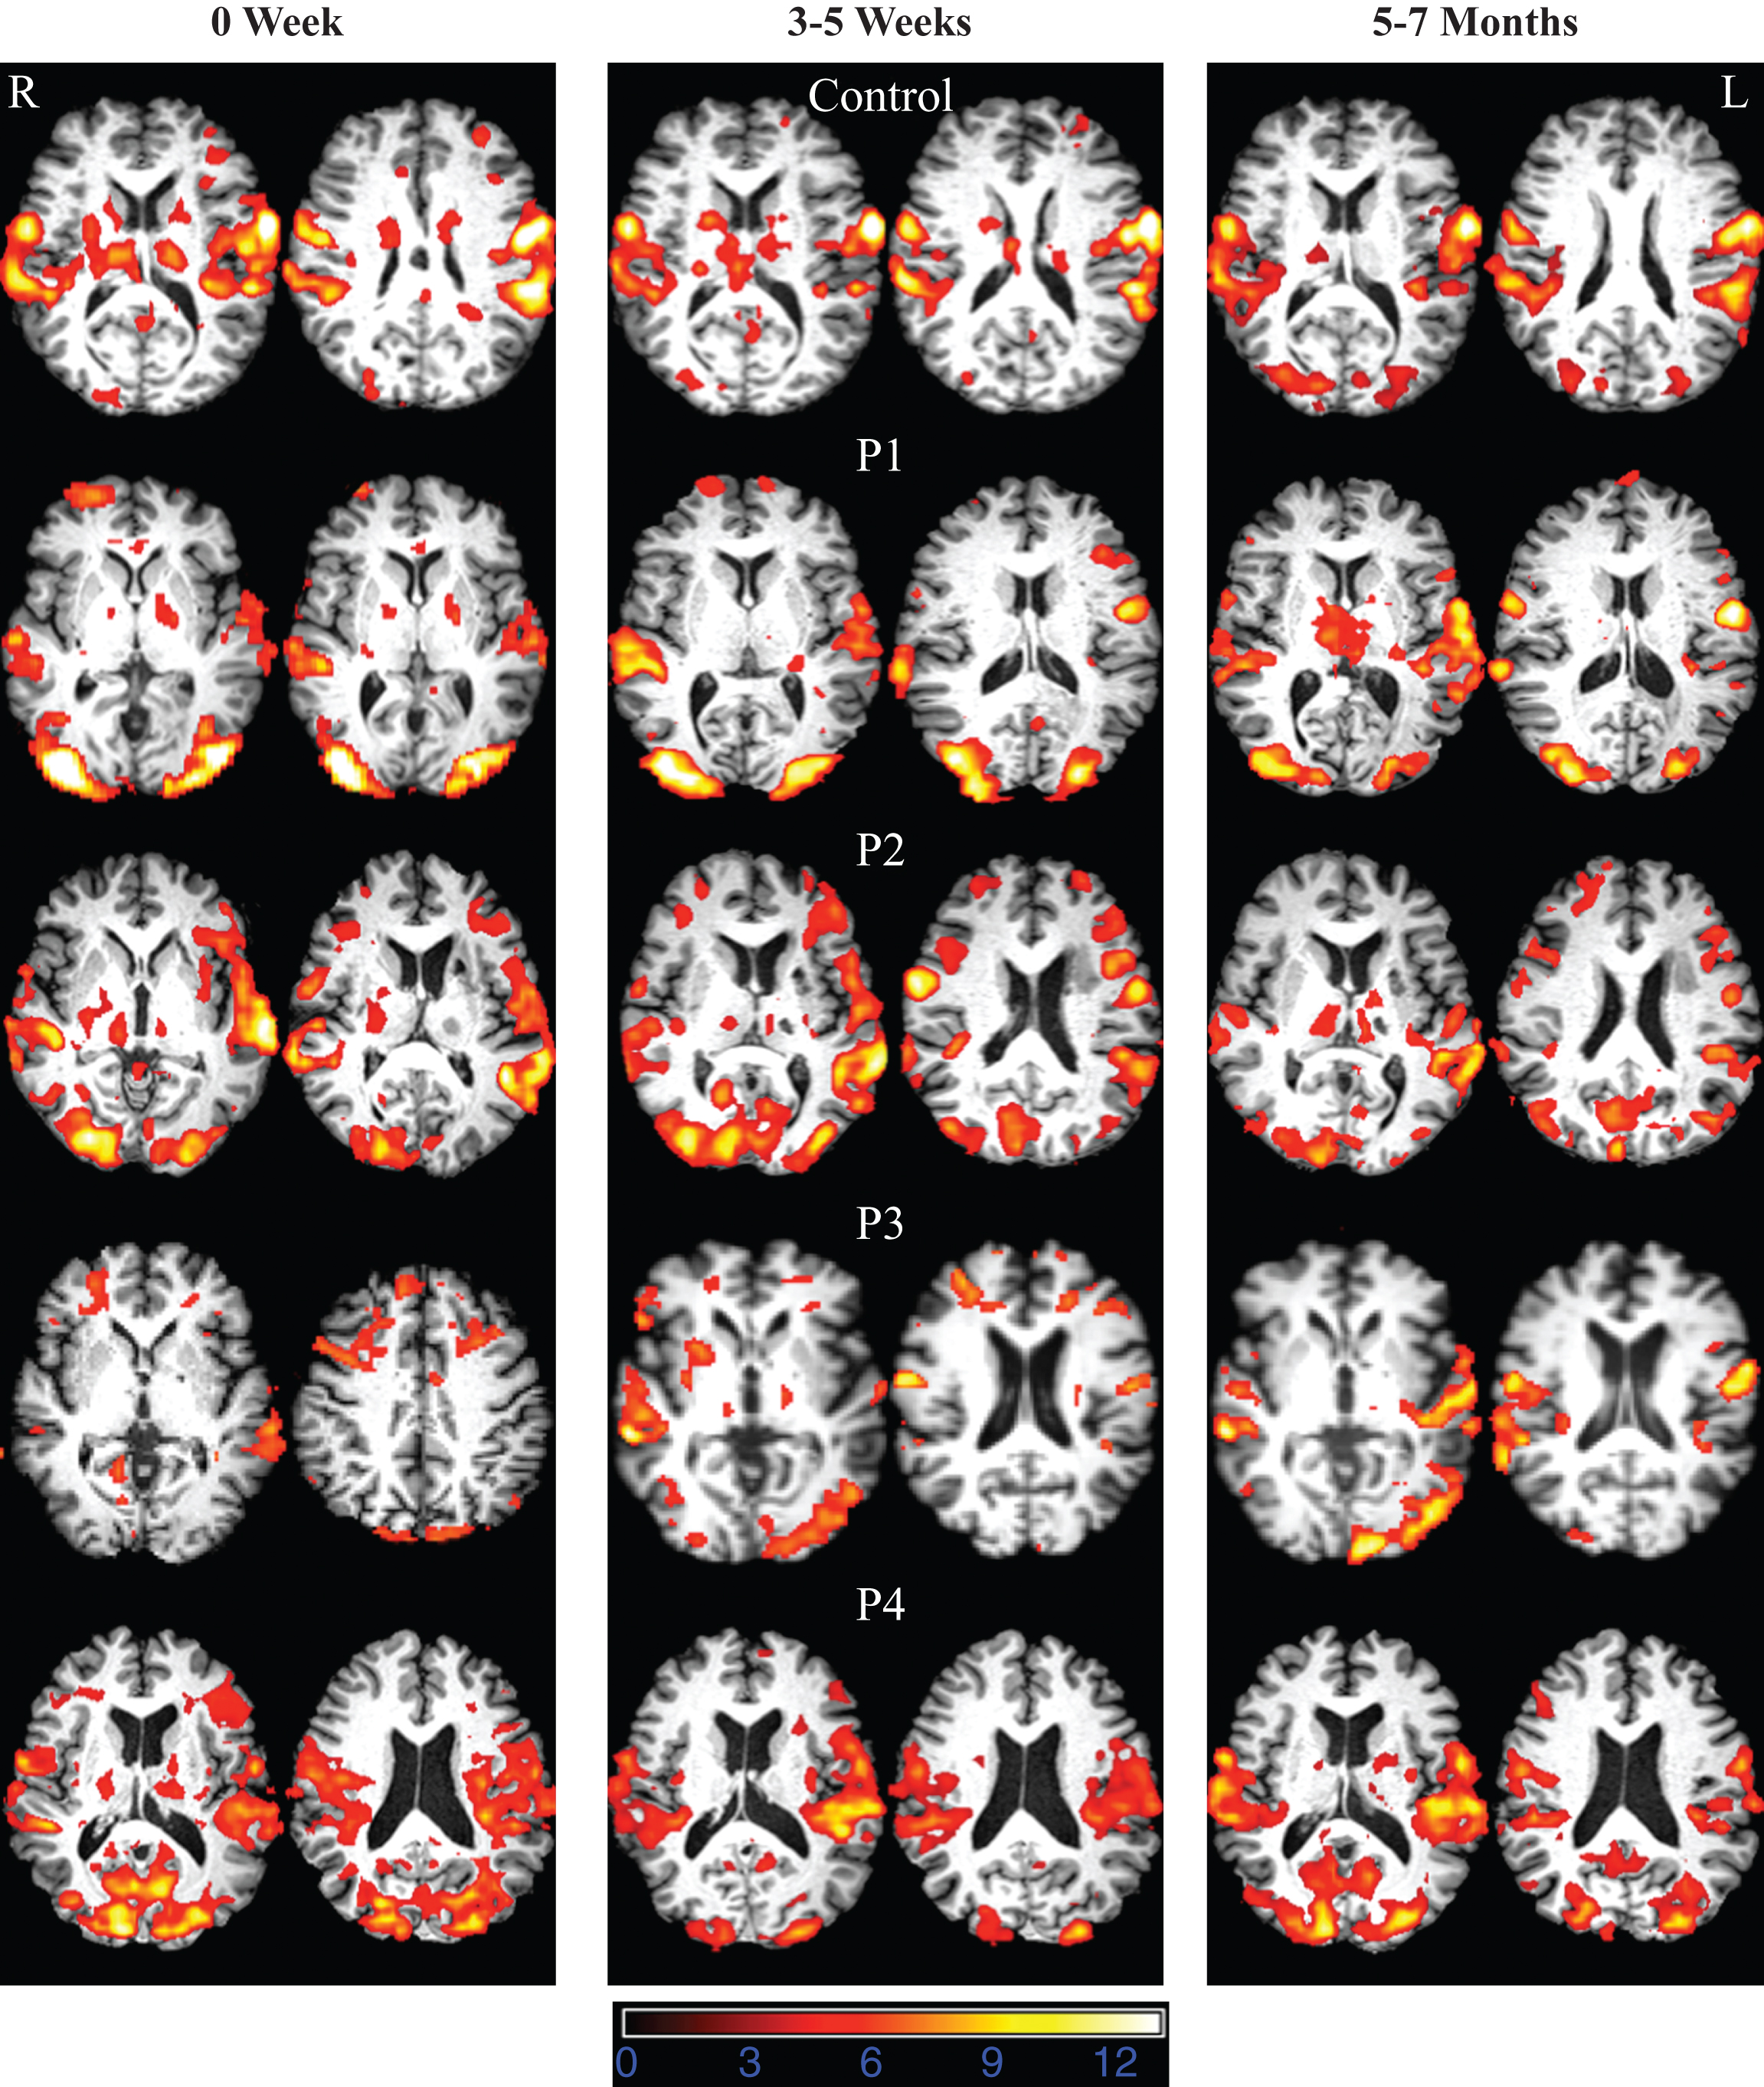 FMRI data registered in MNI space shows areas of activation associated with correct picture naming (phonemic+word cued naming) compared to viewing scrambled pictures at 0W (acute time point), 3–5W (sub acute time point), and 5–7M (chronic time point) for the normal control and participants with aphasia. Z (Gaussianised T/F) statistic images were thresholded using clusters determined by Z > 3.0 and a (corrected) cluster significance threshold of P = 0.05. All images are shown in radiological convention (left in image is right in the brain).